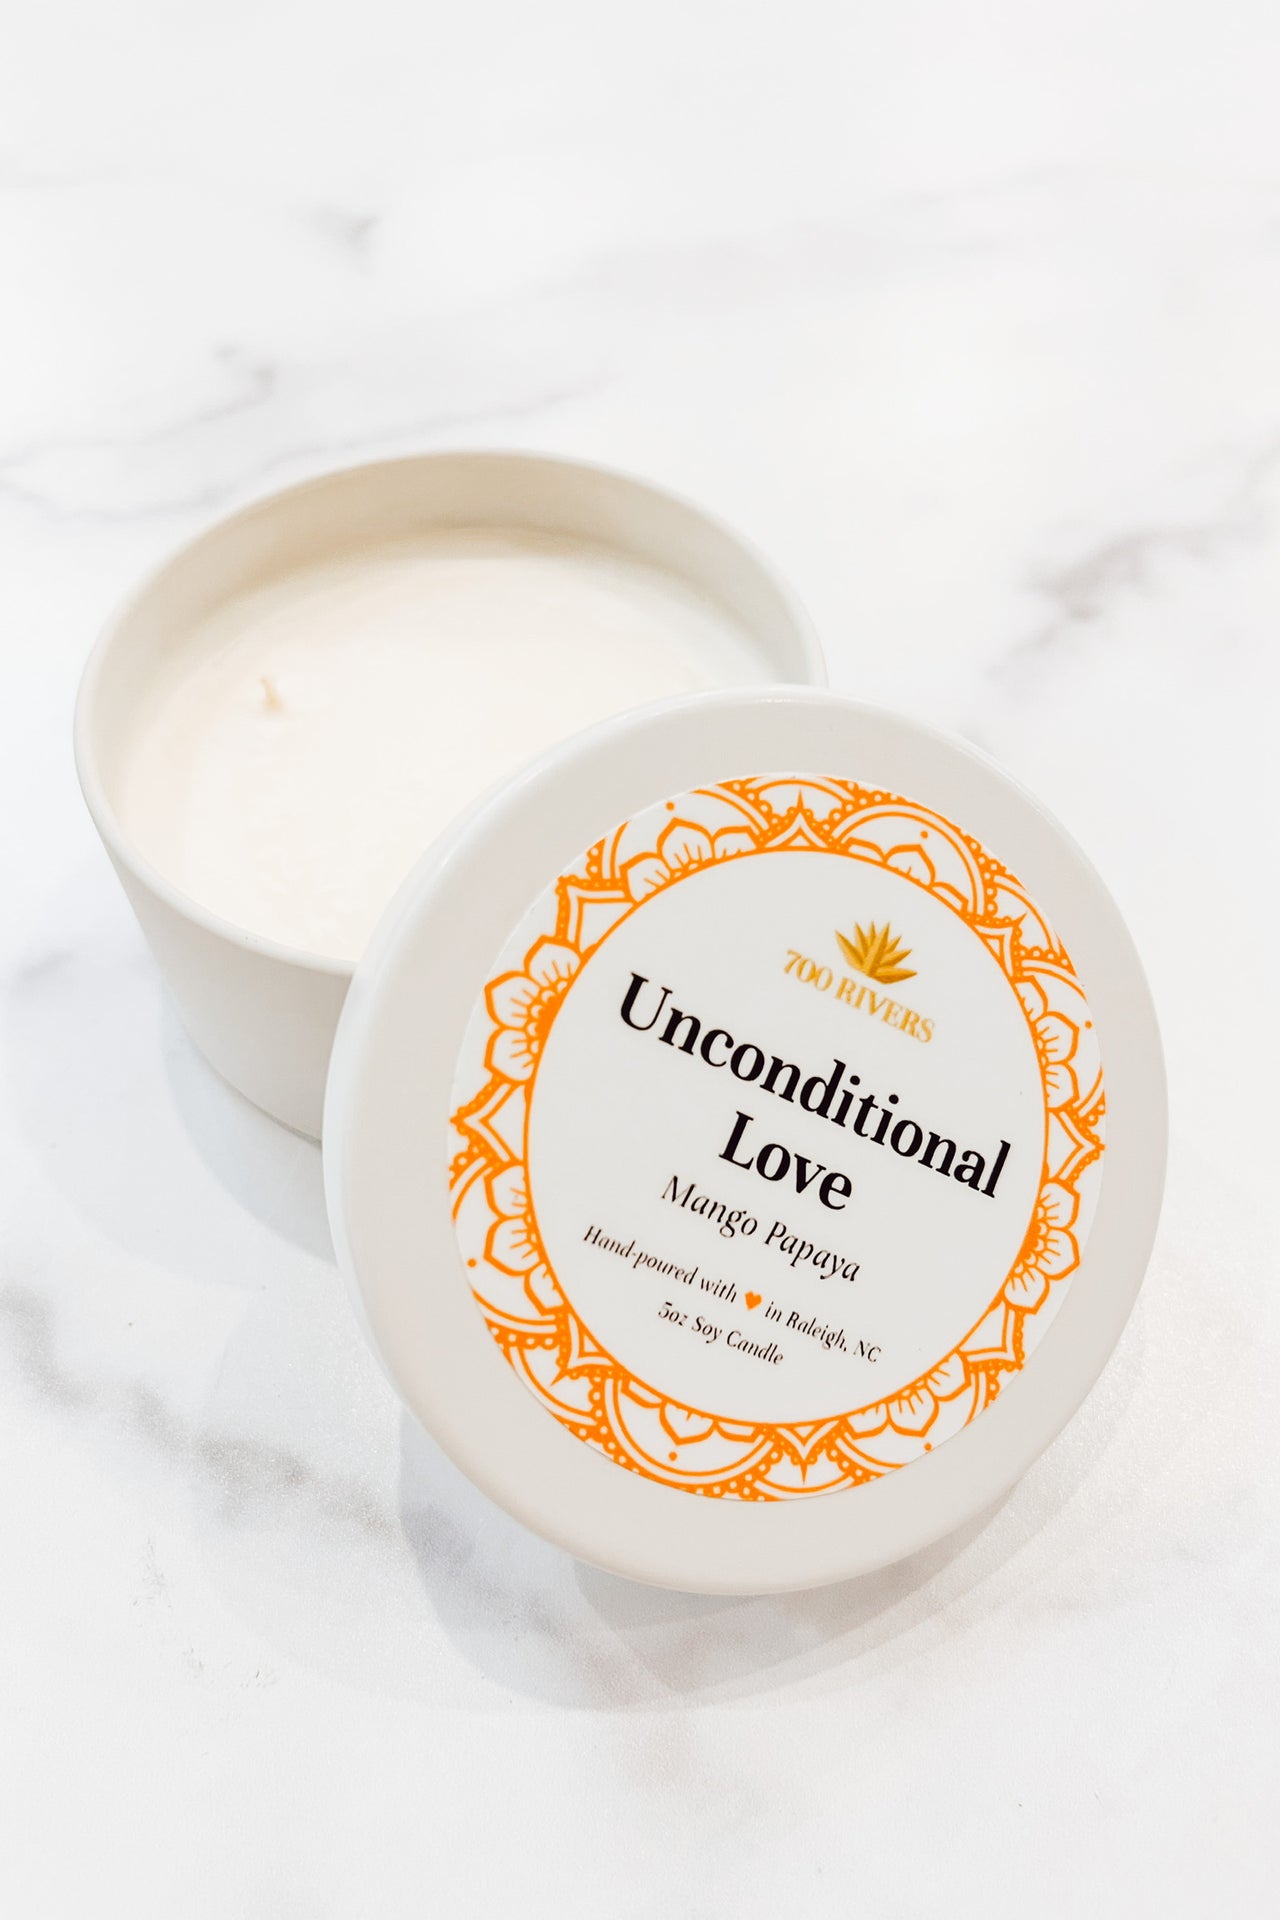 Unconditional Love Candle - 5 oz